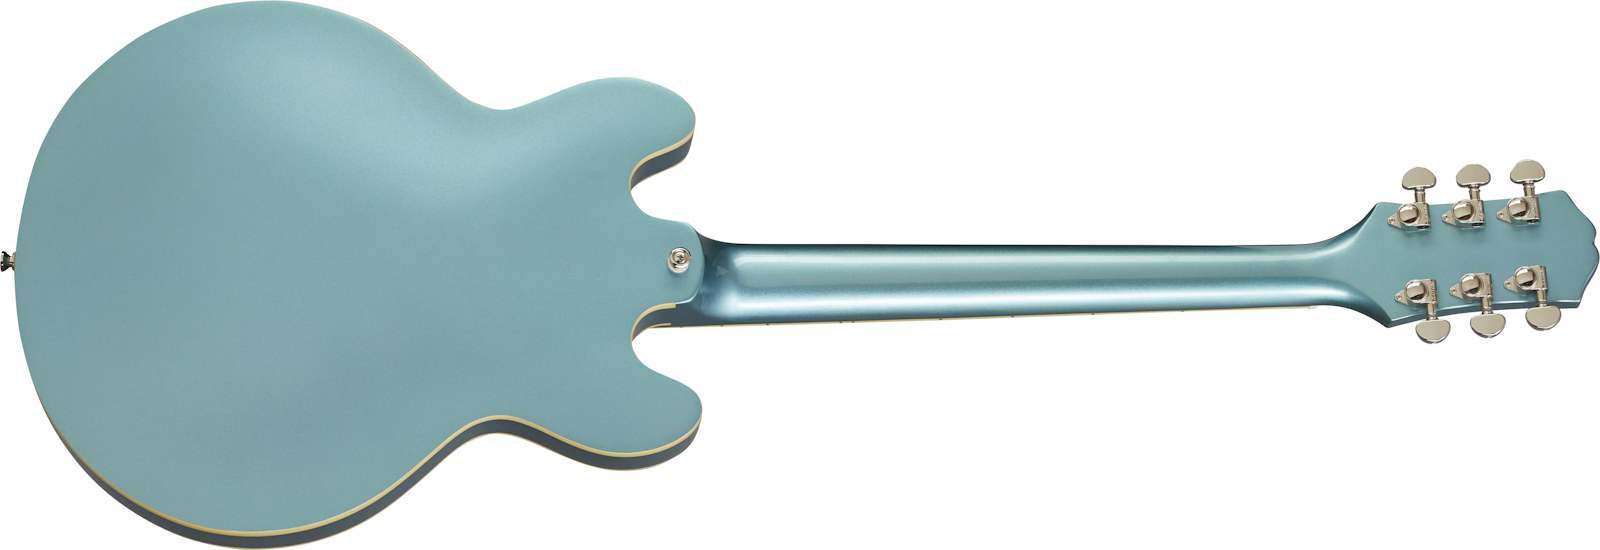 Epiphone Es-339 Inspired By Gibson 2020 2h Ht Rw - Pelham Blue - Semi-hollow electric guitar - Variation 1